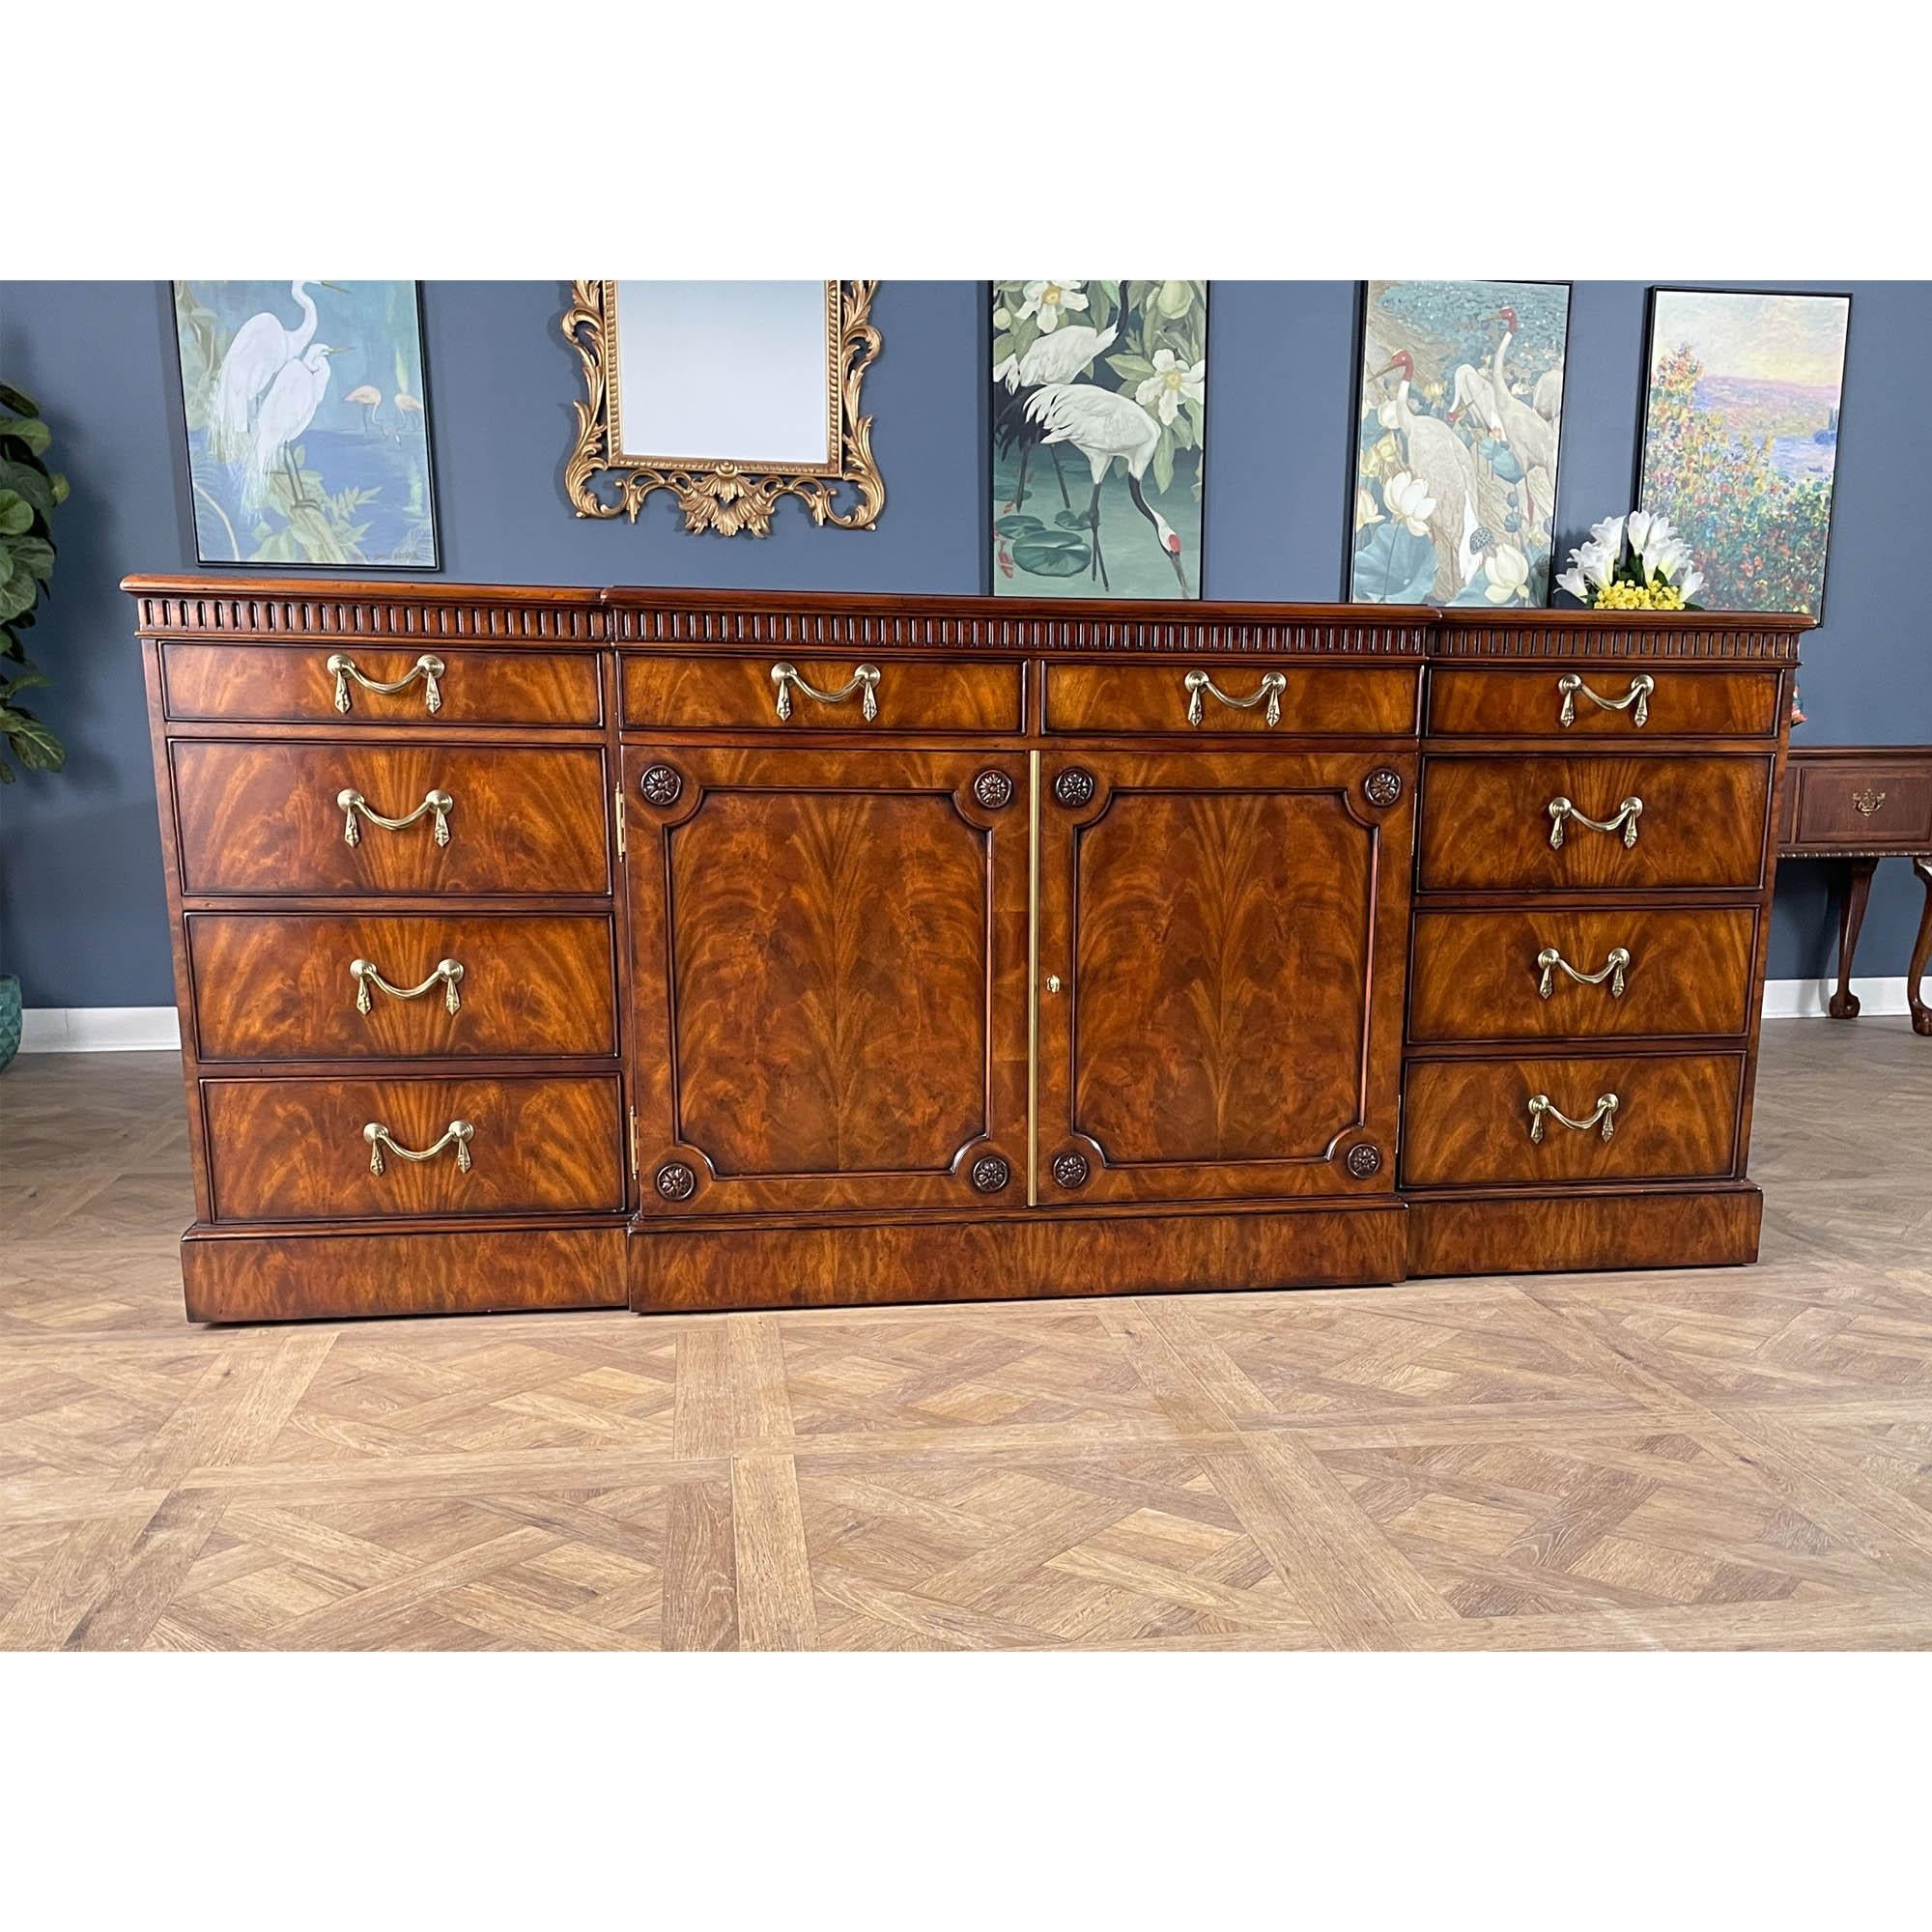 From Niagara Furniture a massive Vintage Theodore Alexander Sideboard in excellent original, as found, condition.

Simple yet sophisticated this oversize Vintage Theodore Alexander Sideboard has everything going for it. A slightly deeper size than